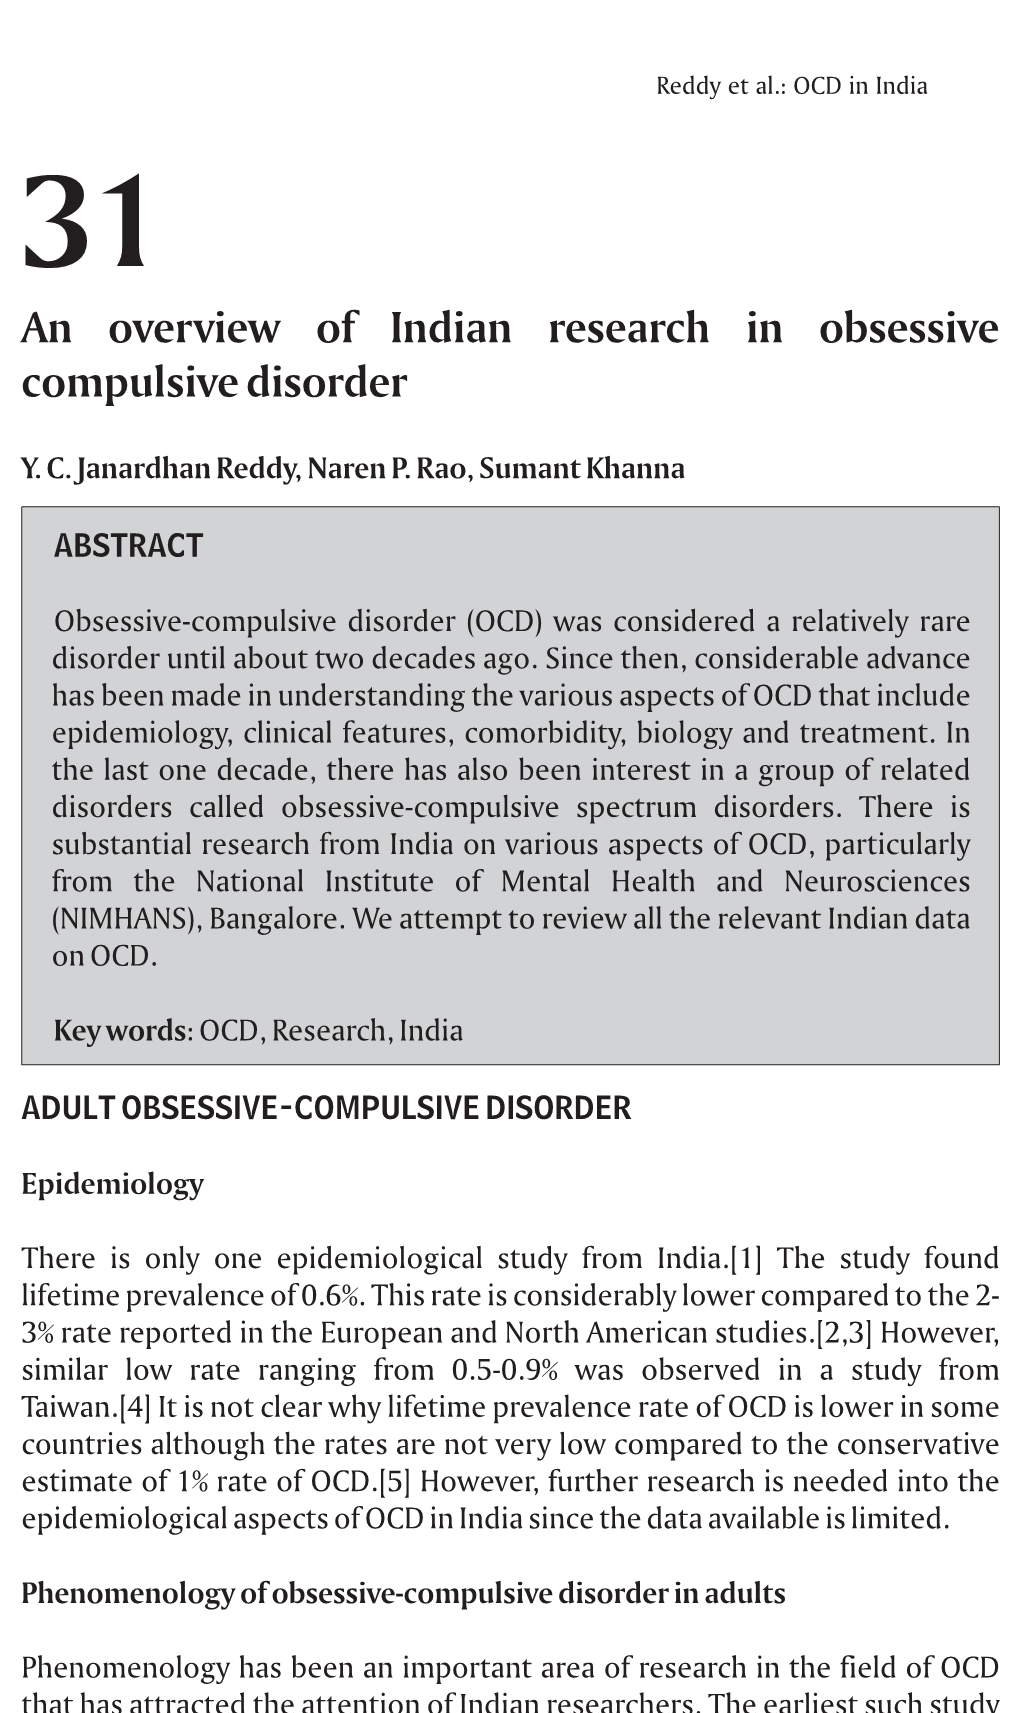 An Overview of Indian Research in Obsessive Compulsive Disorder